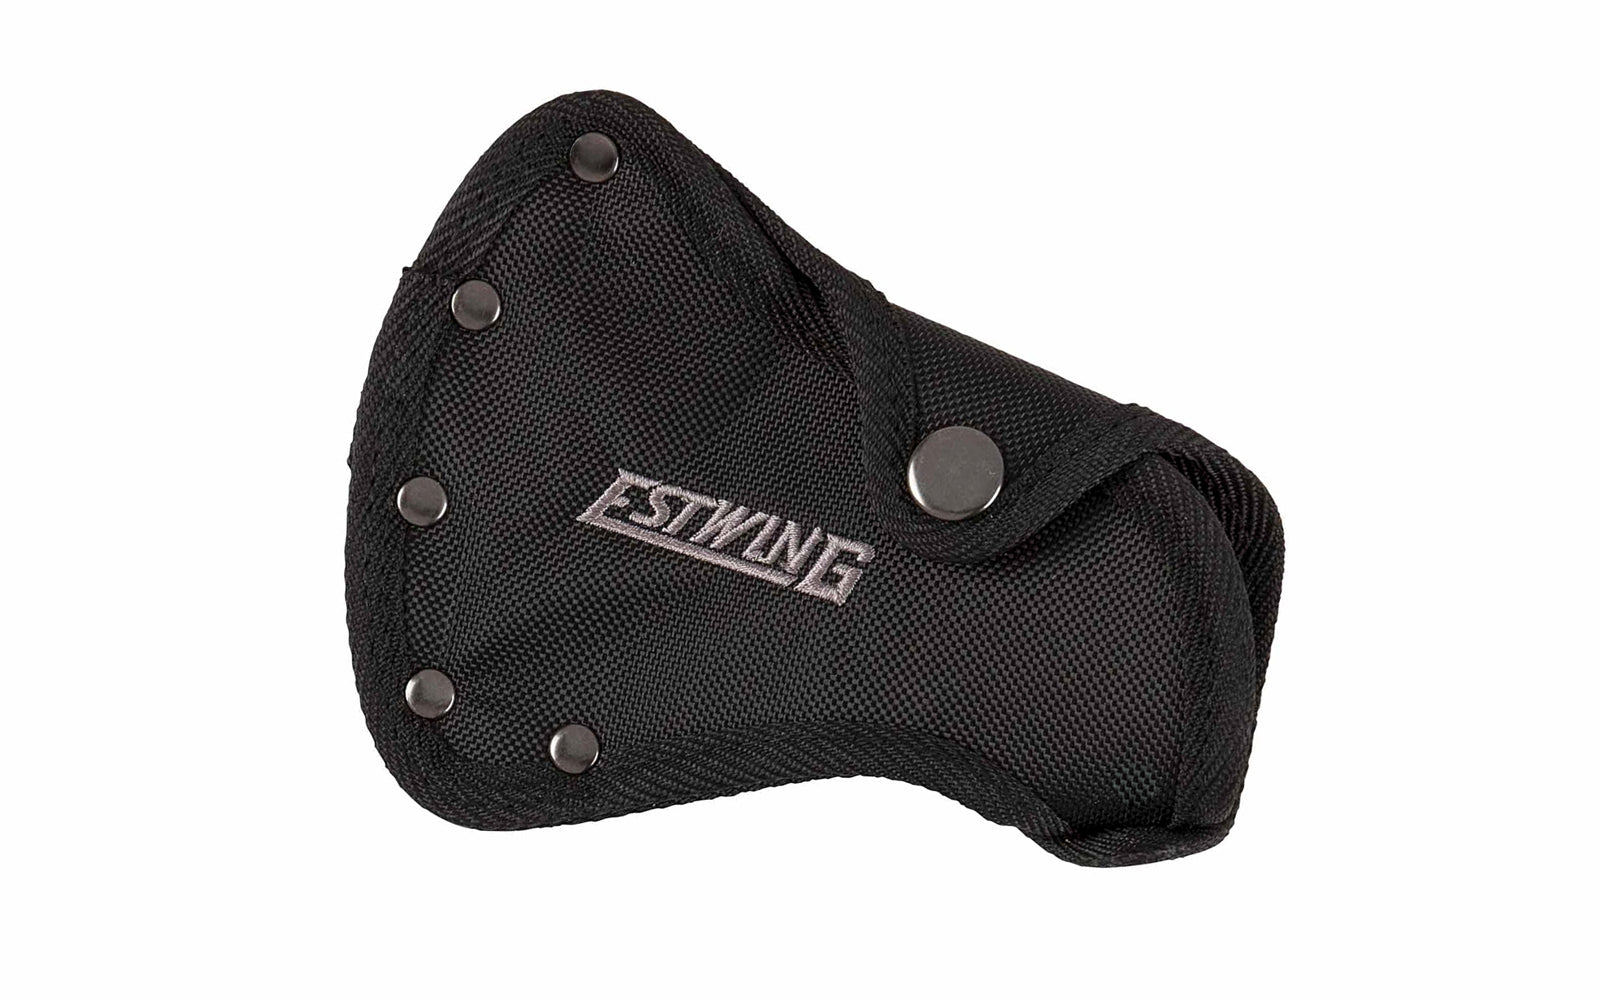 Estwing Model No. 16 Black Sheath. A replacement black nylon sheath for Estwing models No. E24A, EB-25A, & E24ASEA hatchets. Made of durable ballistic nylon construction with reinforced stitching. Hatchet Sheath. Axe Sheath. A great sheath to protect your Estwing hatchets & axes. 0034139200321.  